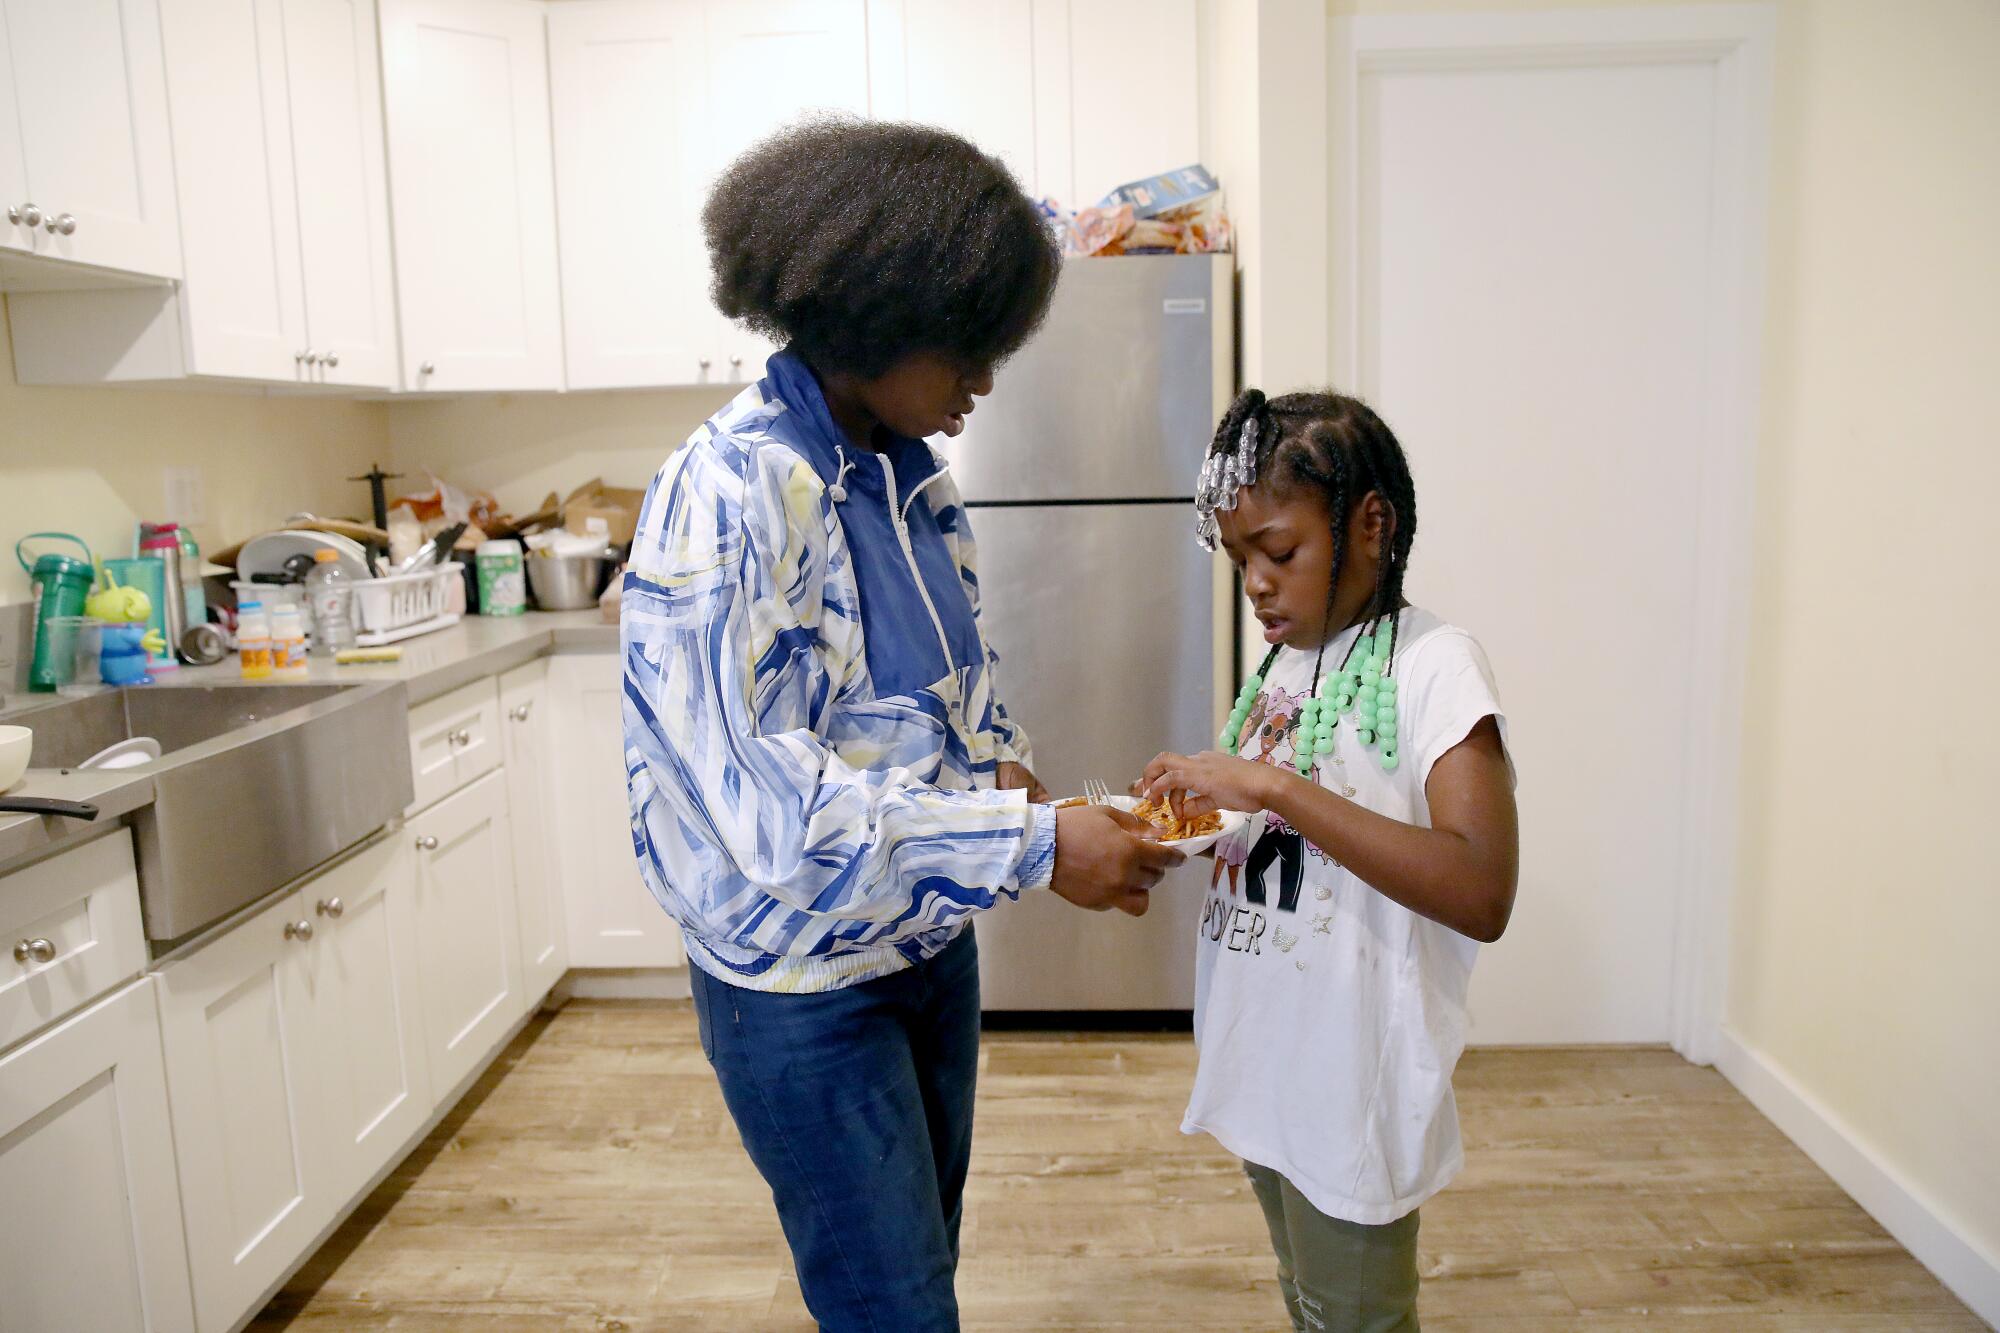 Courtney Bailey, mother of five children, serves lunch to daughter Noelle (cq) Morris, 7, at their apartment in Los Angeles